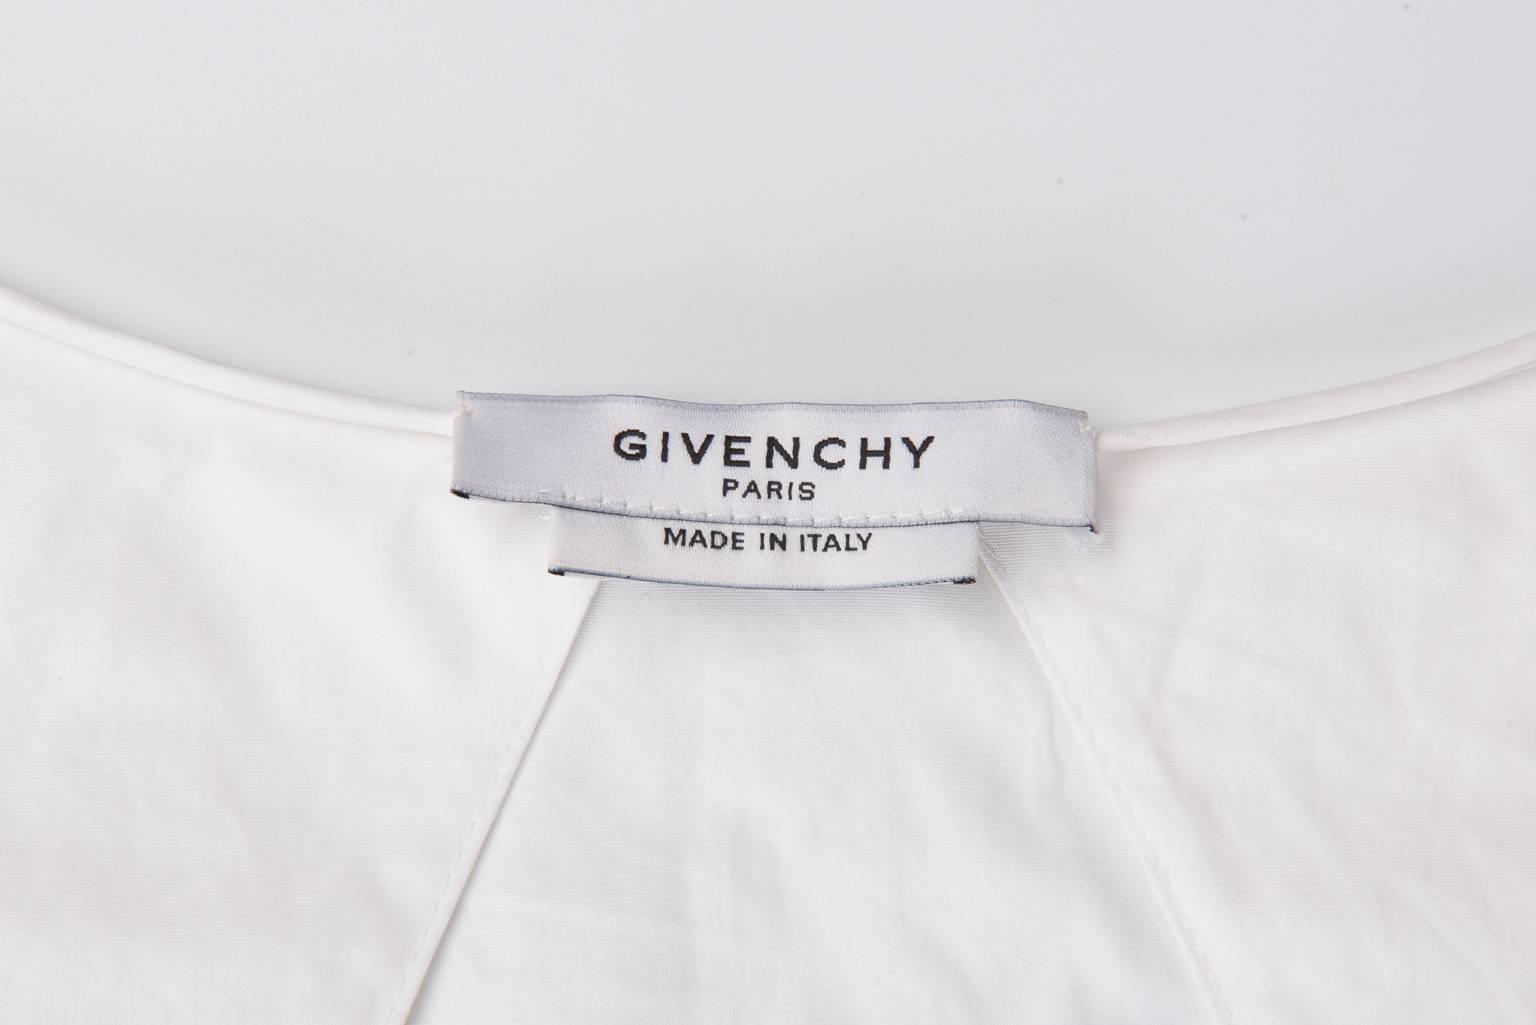 Riccardo Tisci For Givenchy Party Dress For Sale 3